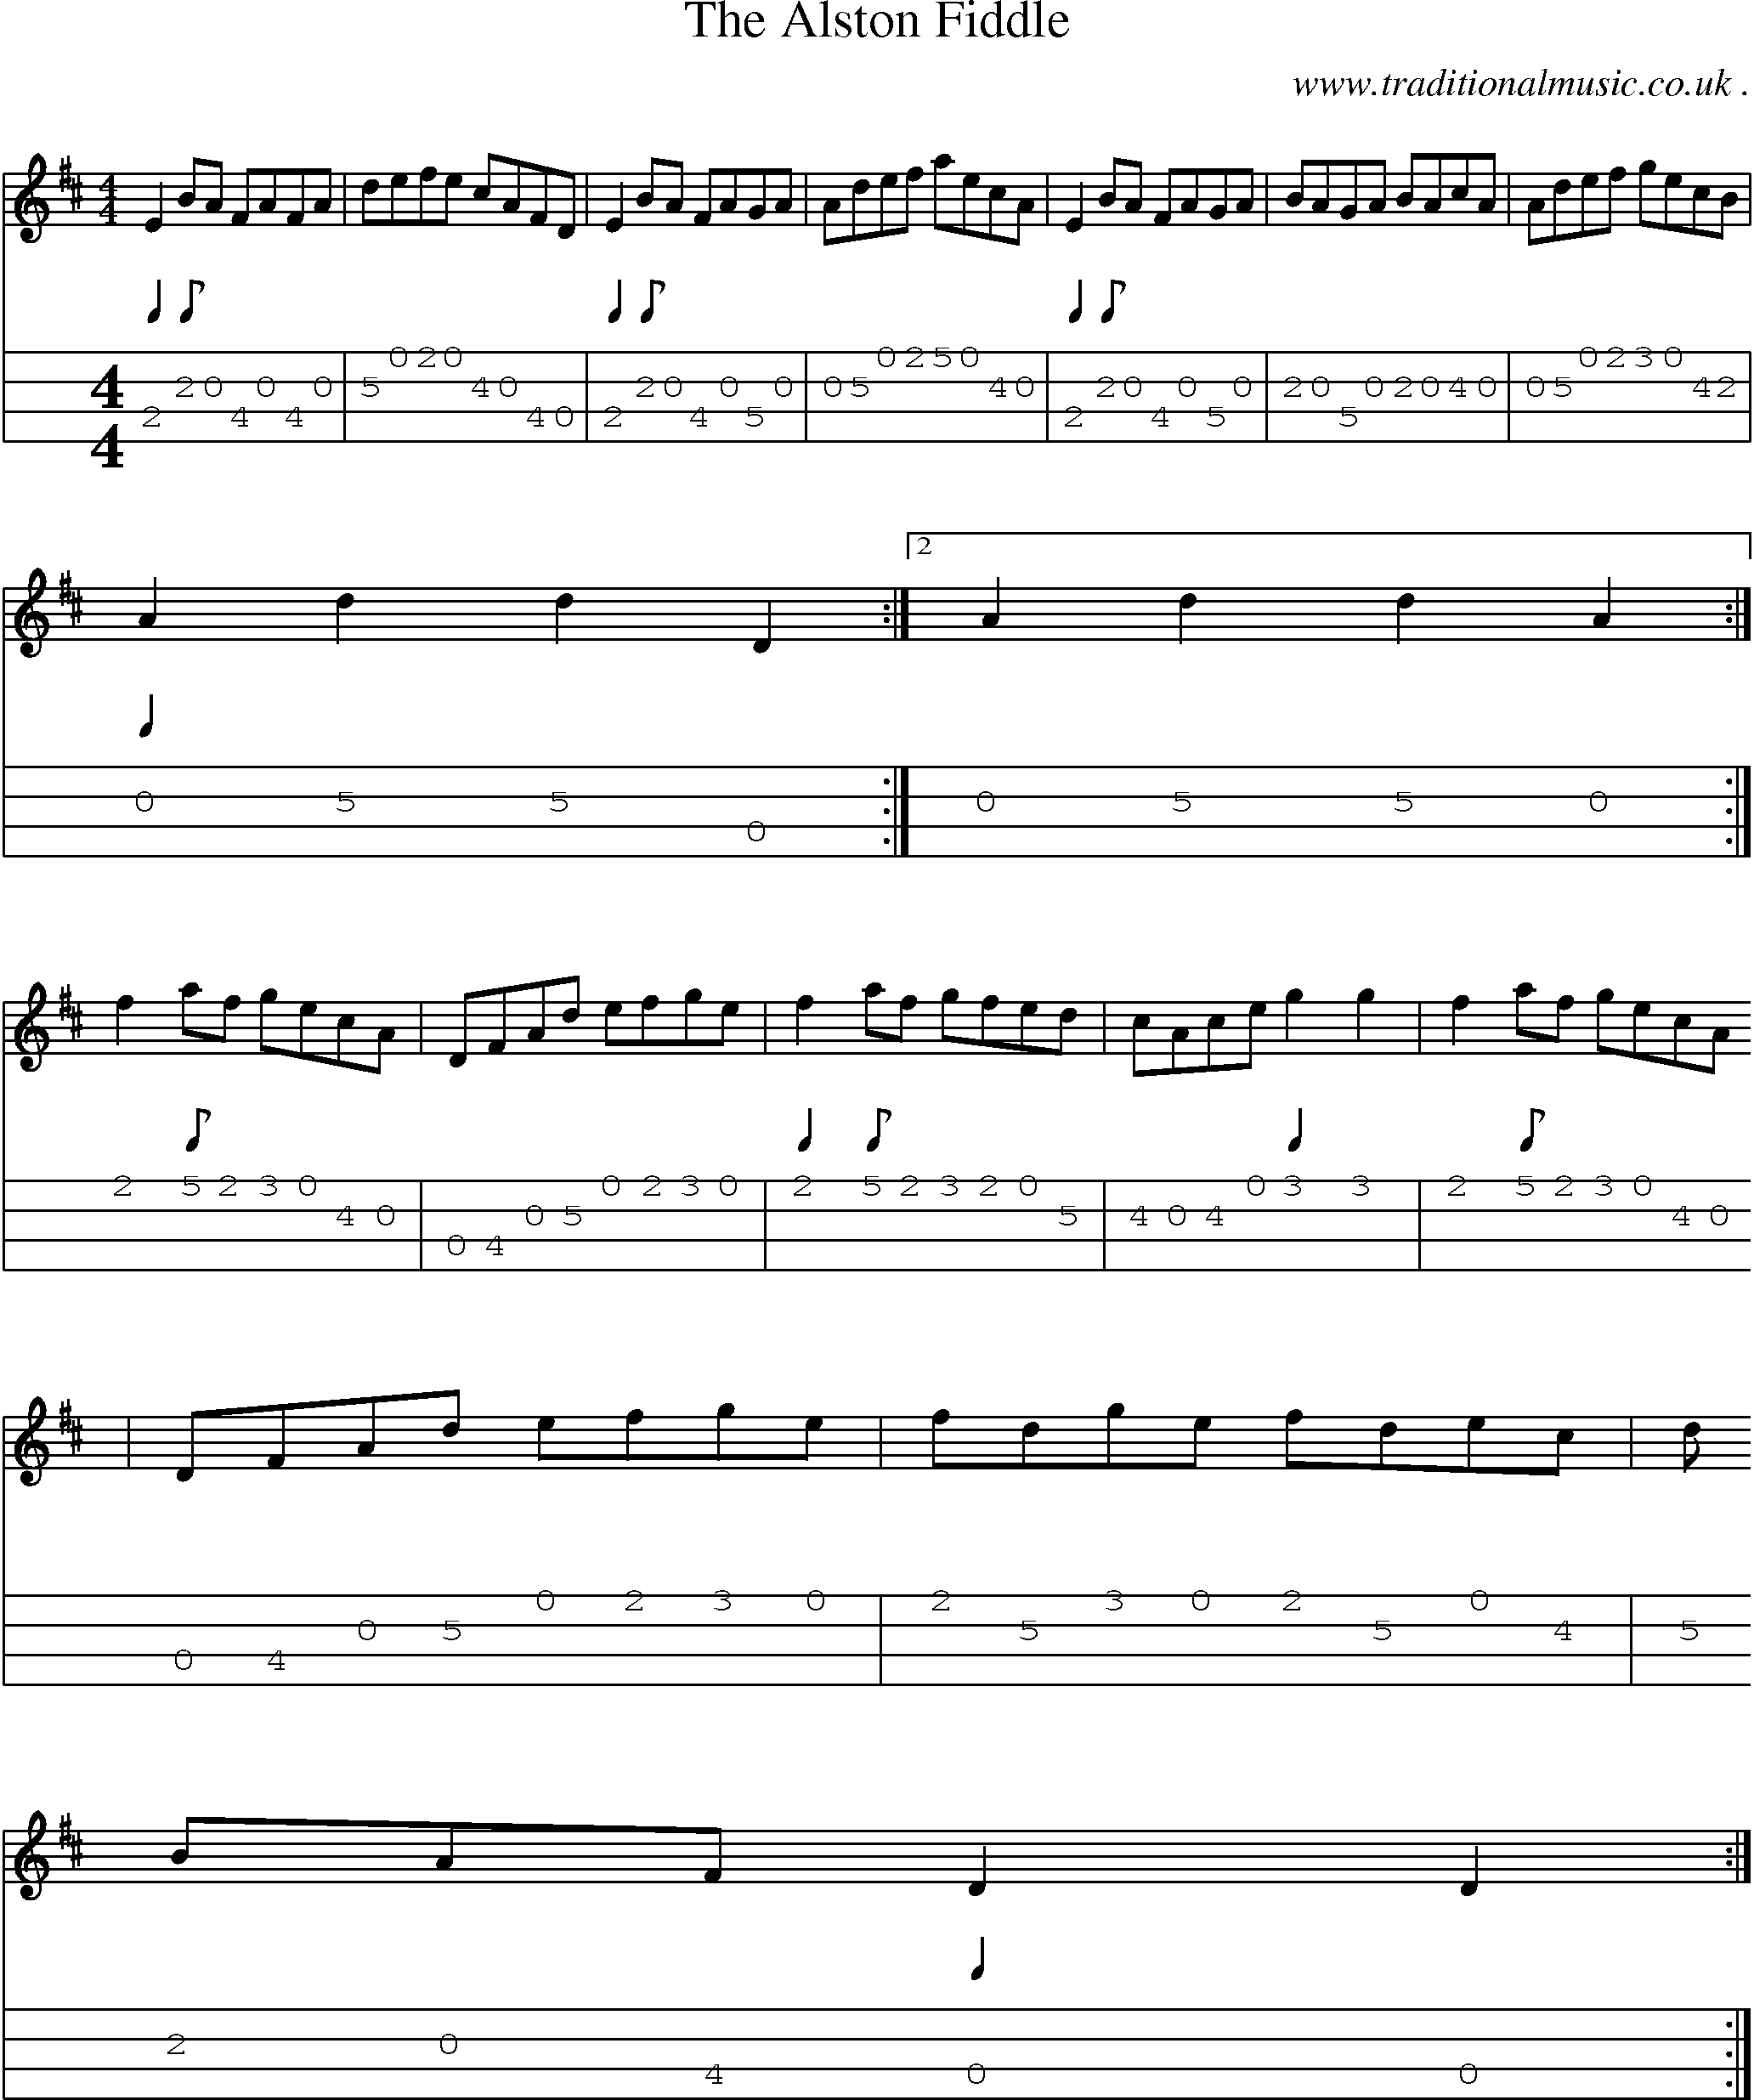 Sheet-Music and Mandolin Tabs for The Alston Fiddle